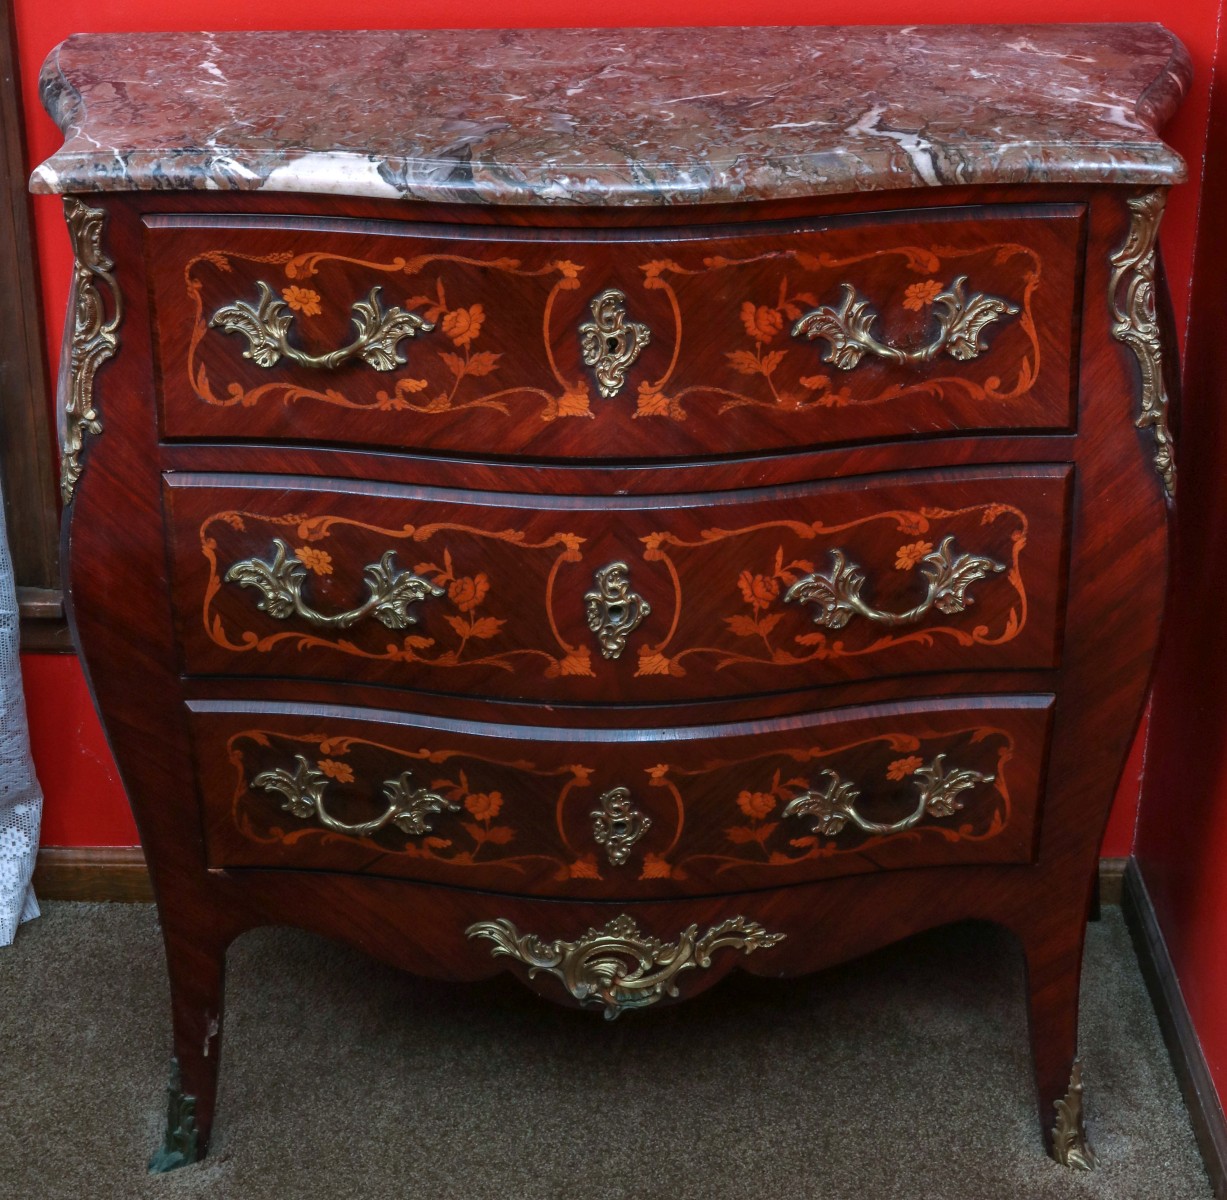 A LATE 20TH CENTURY FRENCH STYLE MARQUETRY BOMBE CHEST